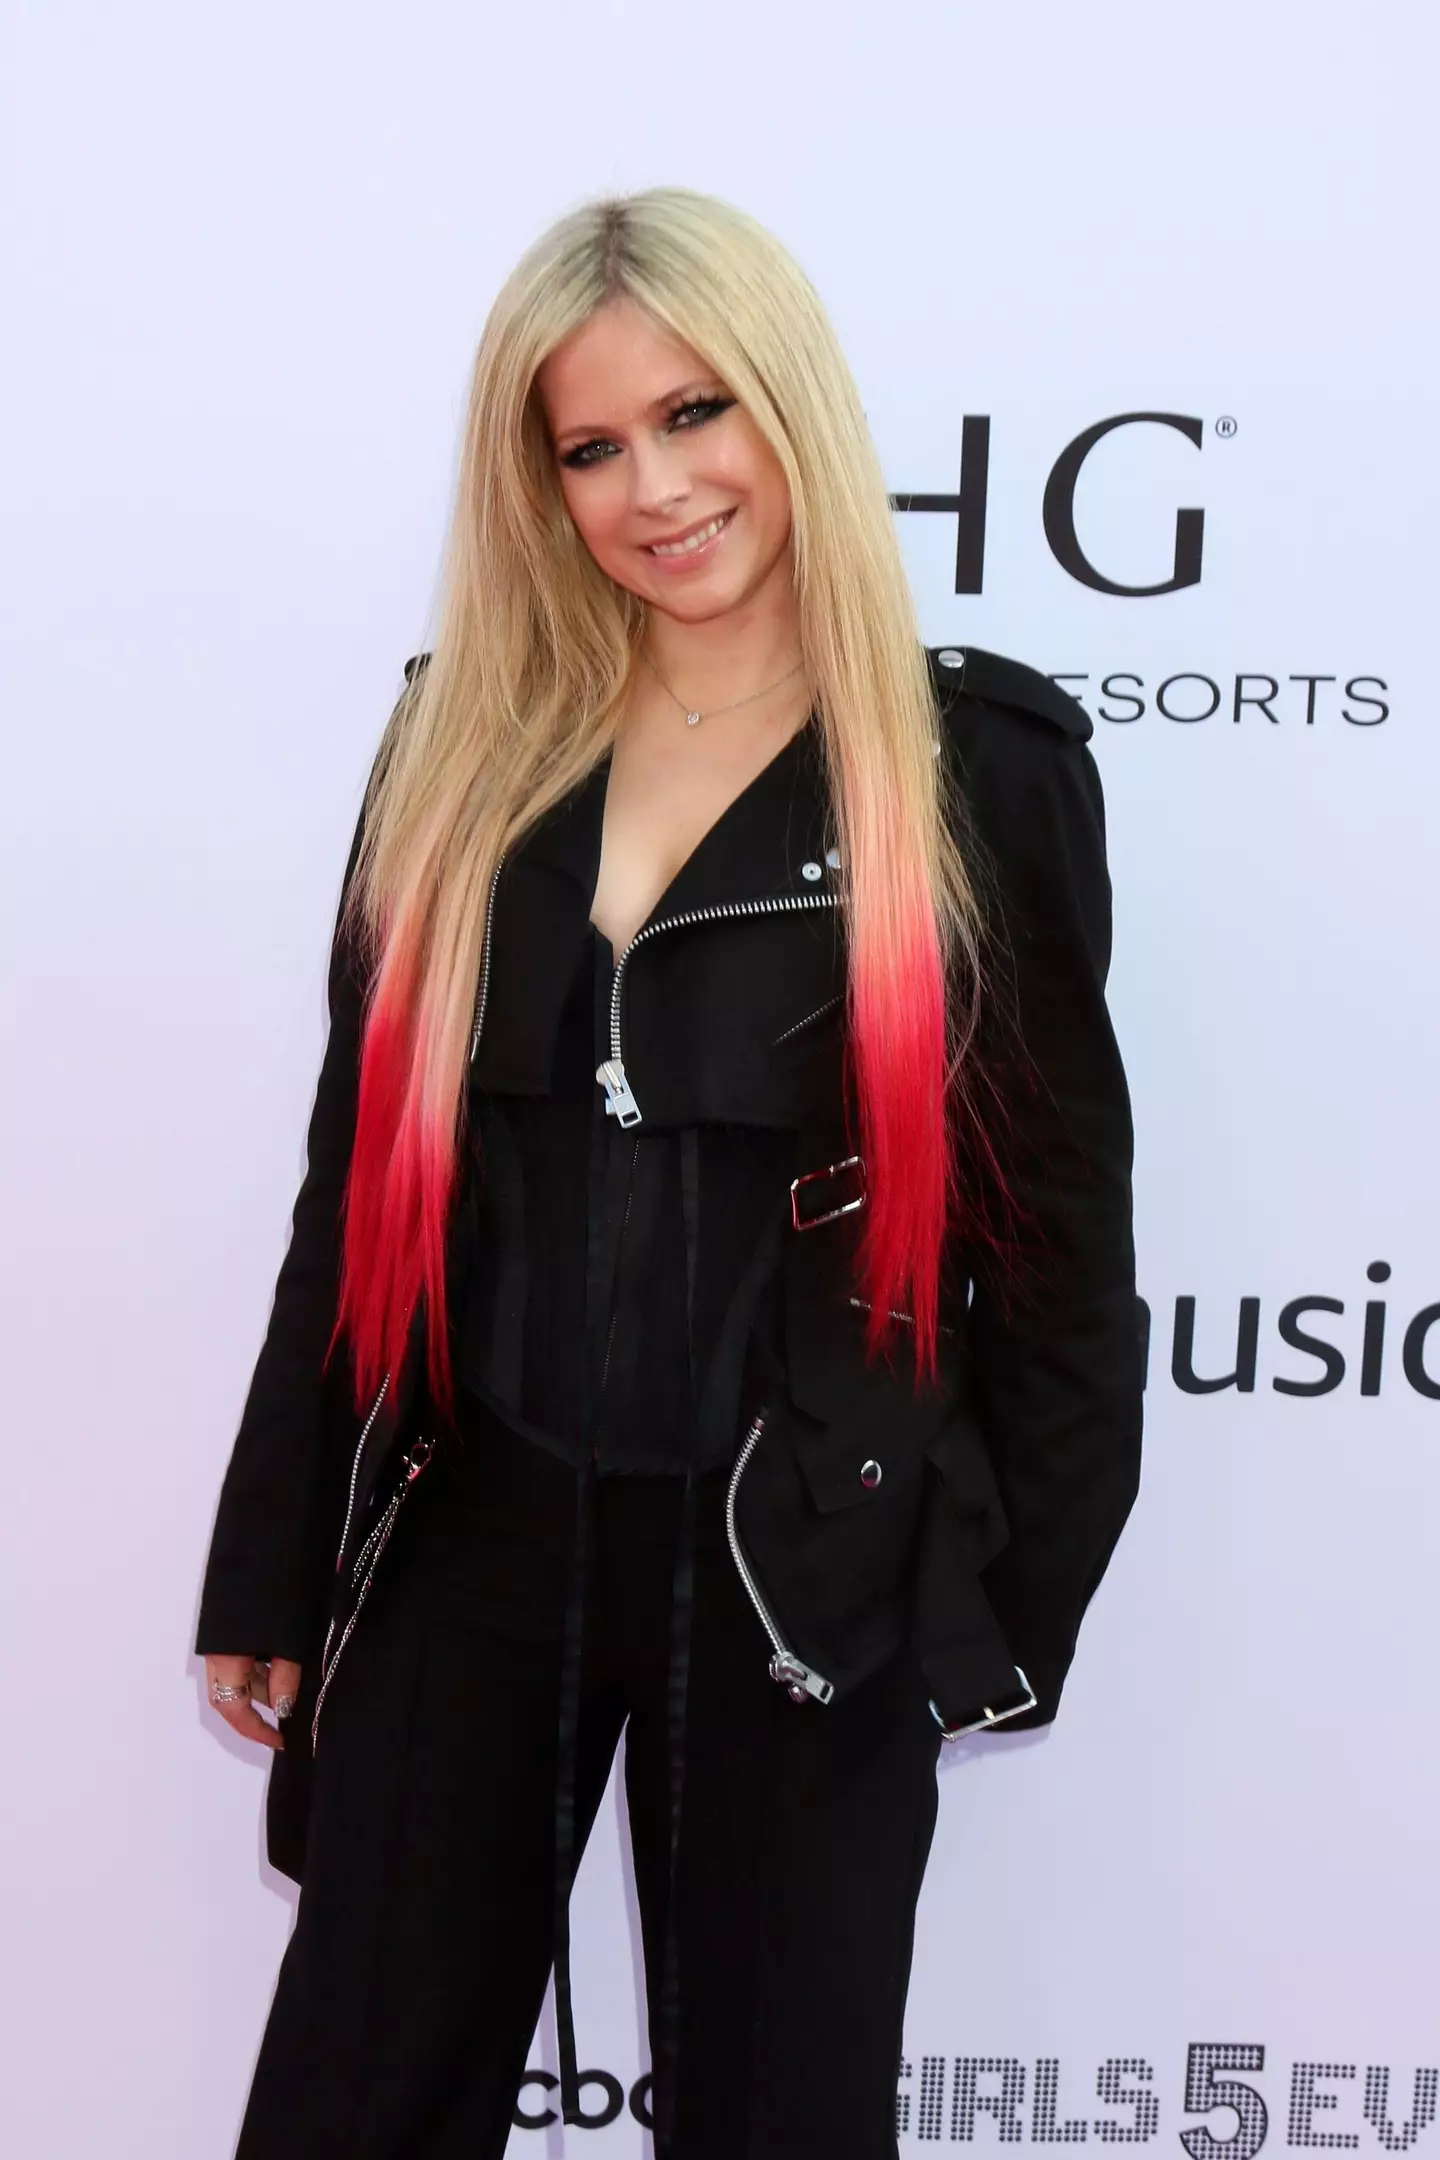 A conspiracy theory once claimed that Avril Lavigne was dead.